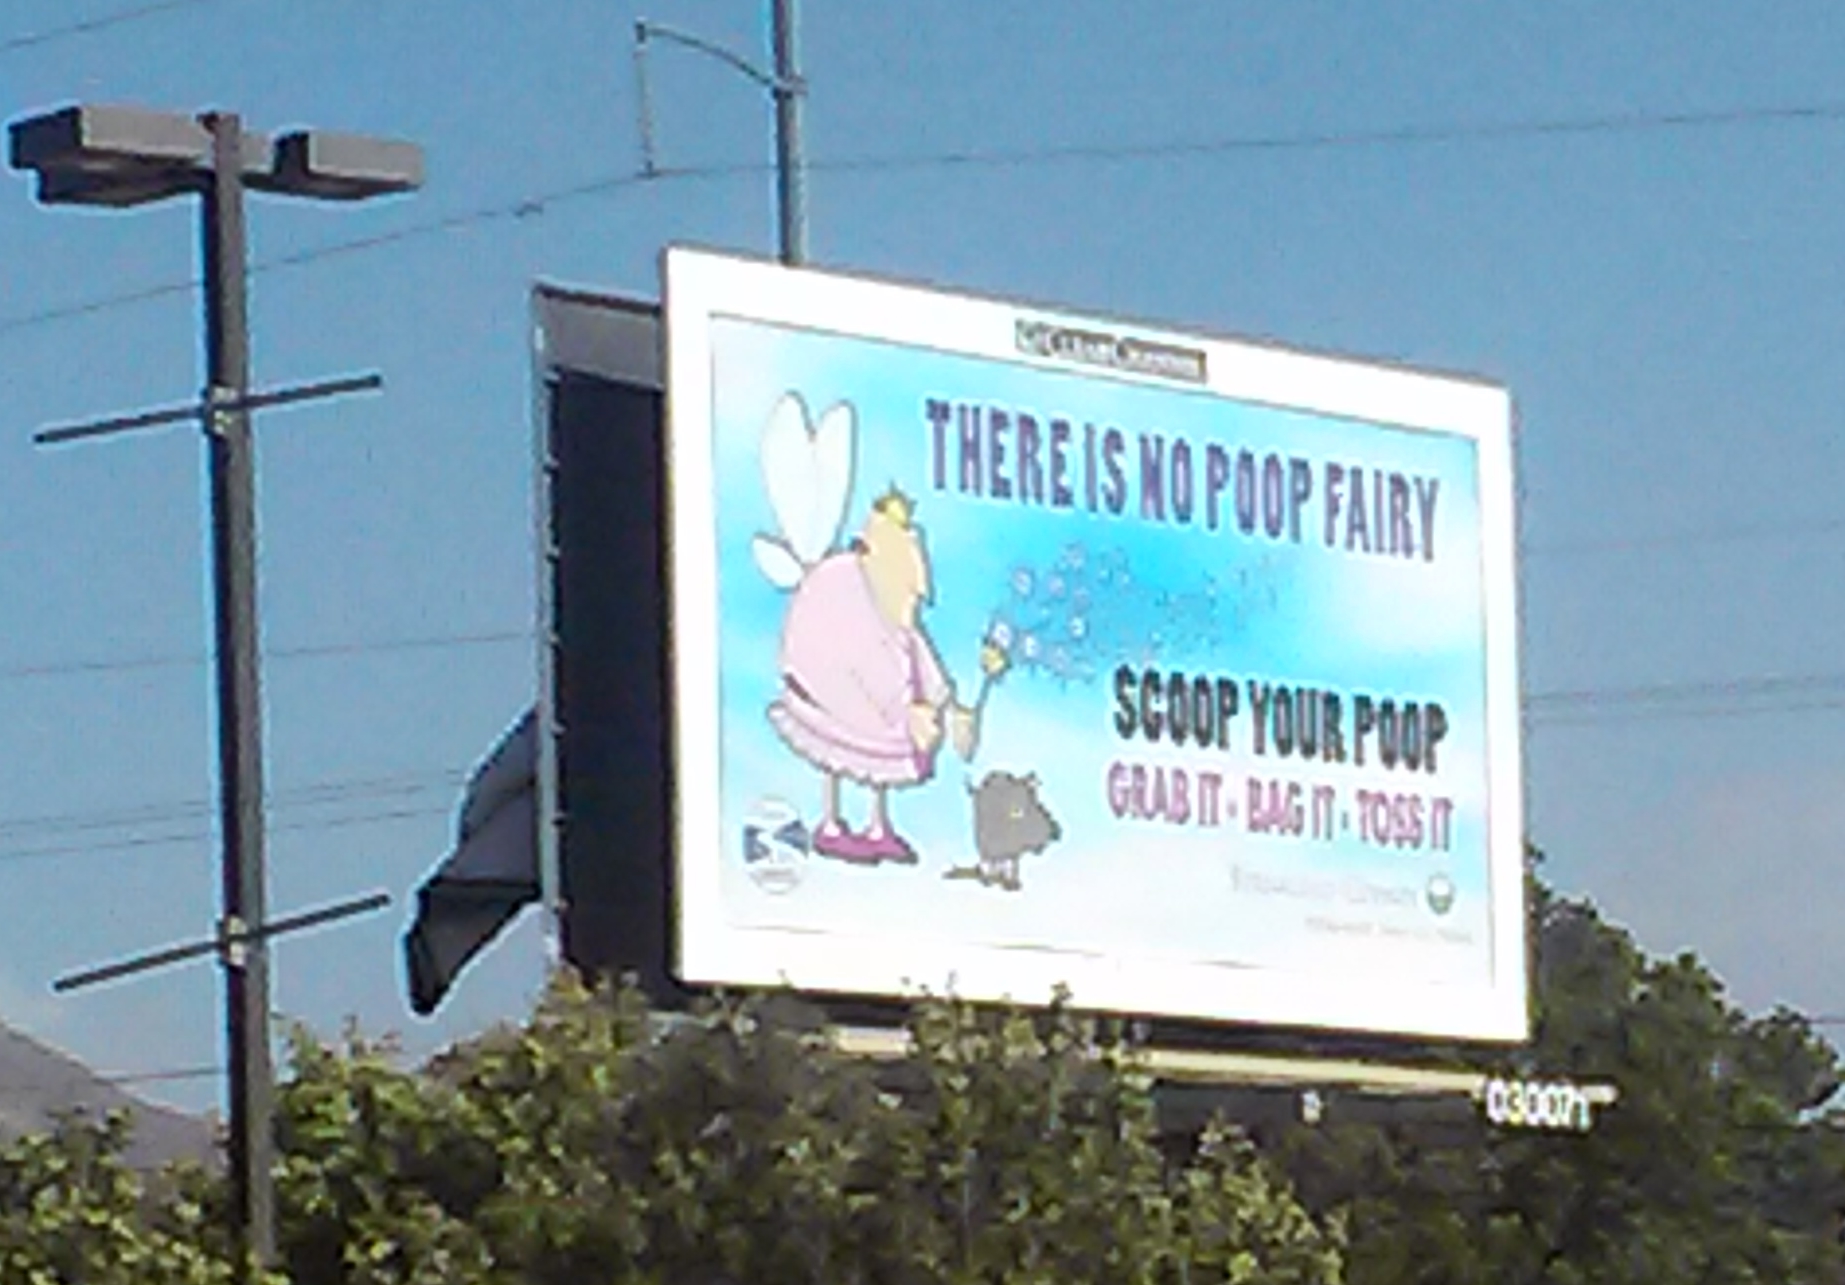 billboard that says 'There is no Poop Fairy,' with a photo of a cartoon dog pooping and a cartoon fairy, telling people to scoop their poop